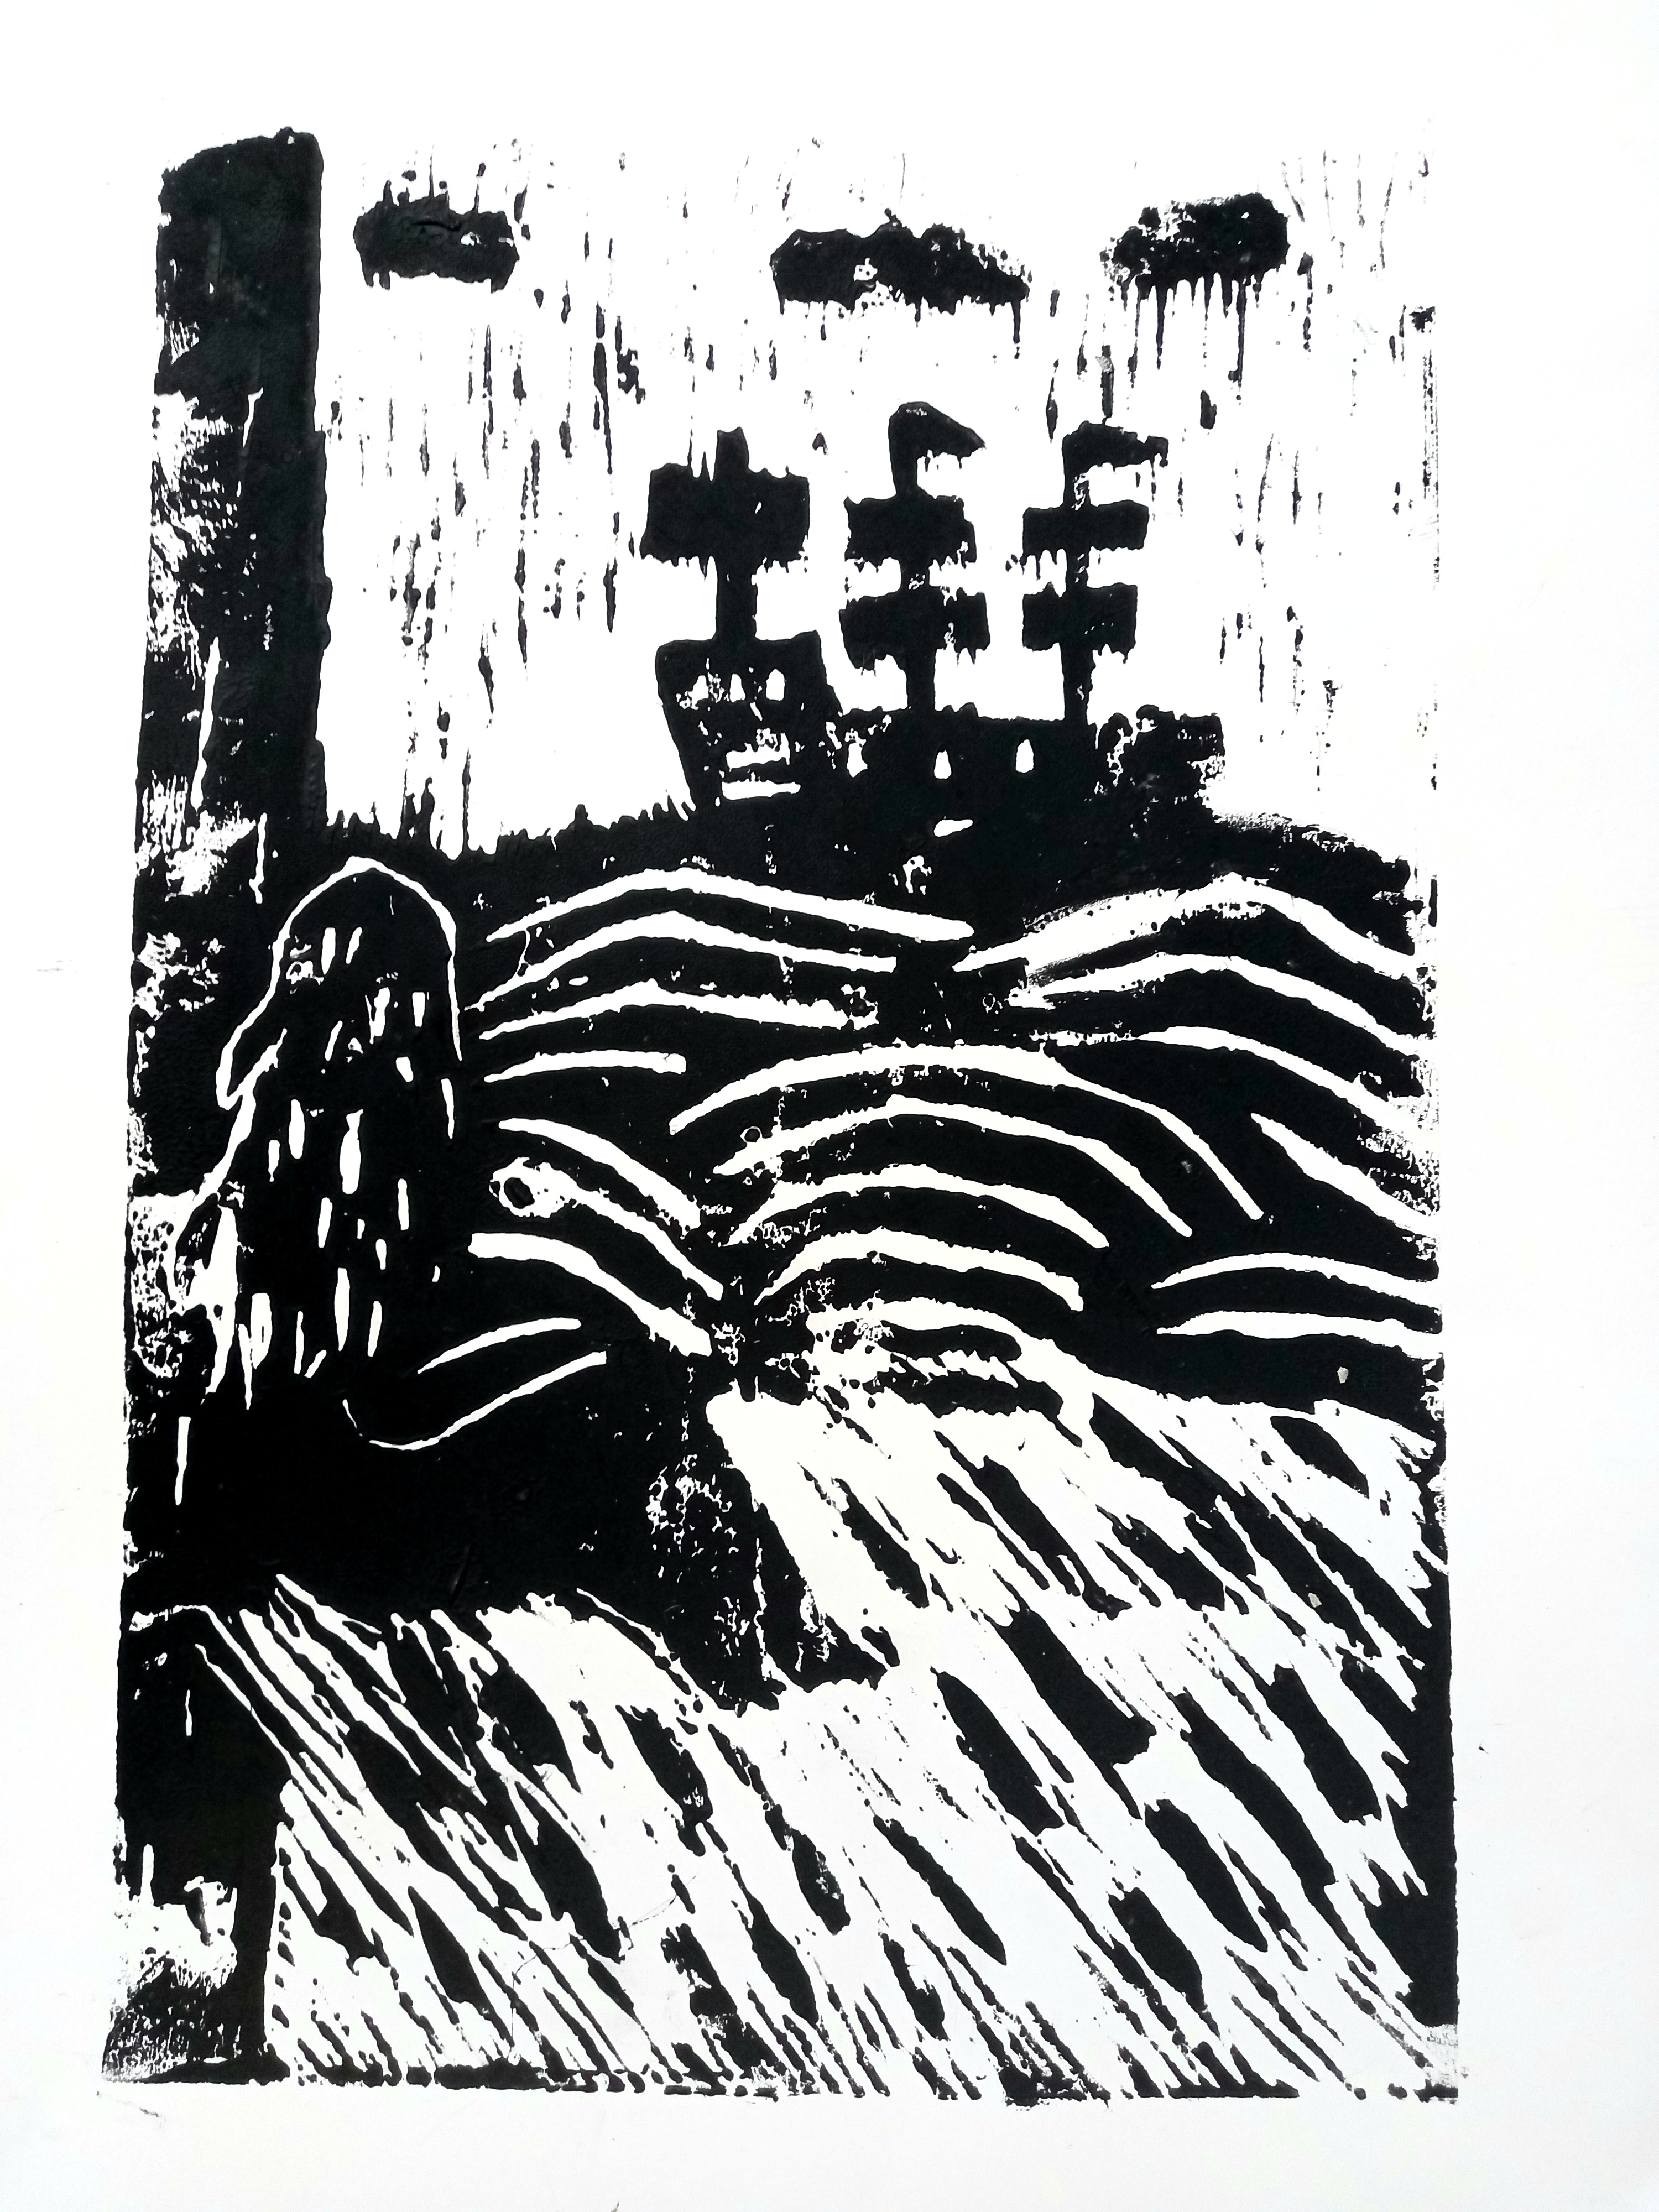 Welsh female heroines fighting her own battles. Exploring the dark themes of sexism, violence and feminism in this retelling theough rough printmaking and black and white imagery.